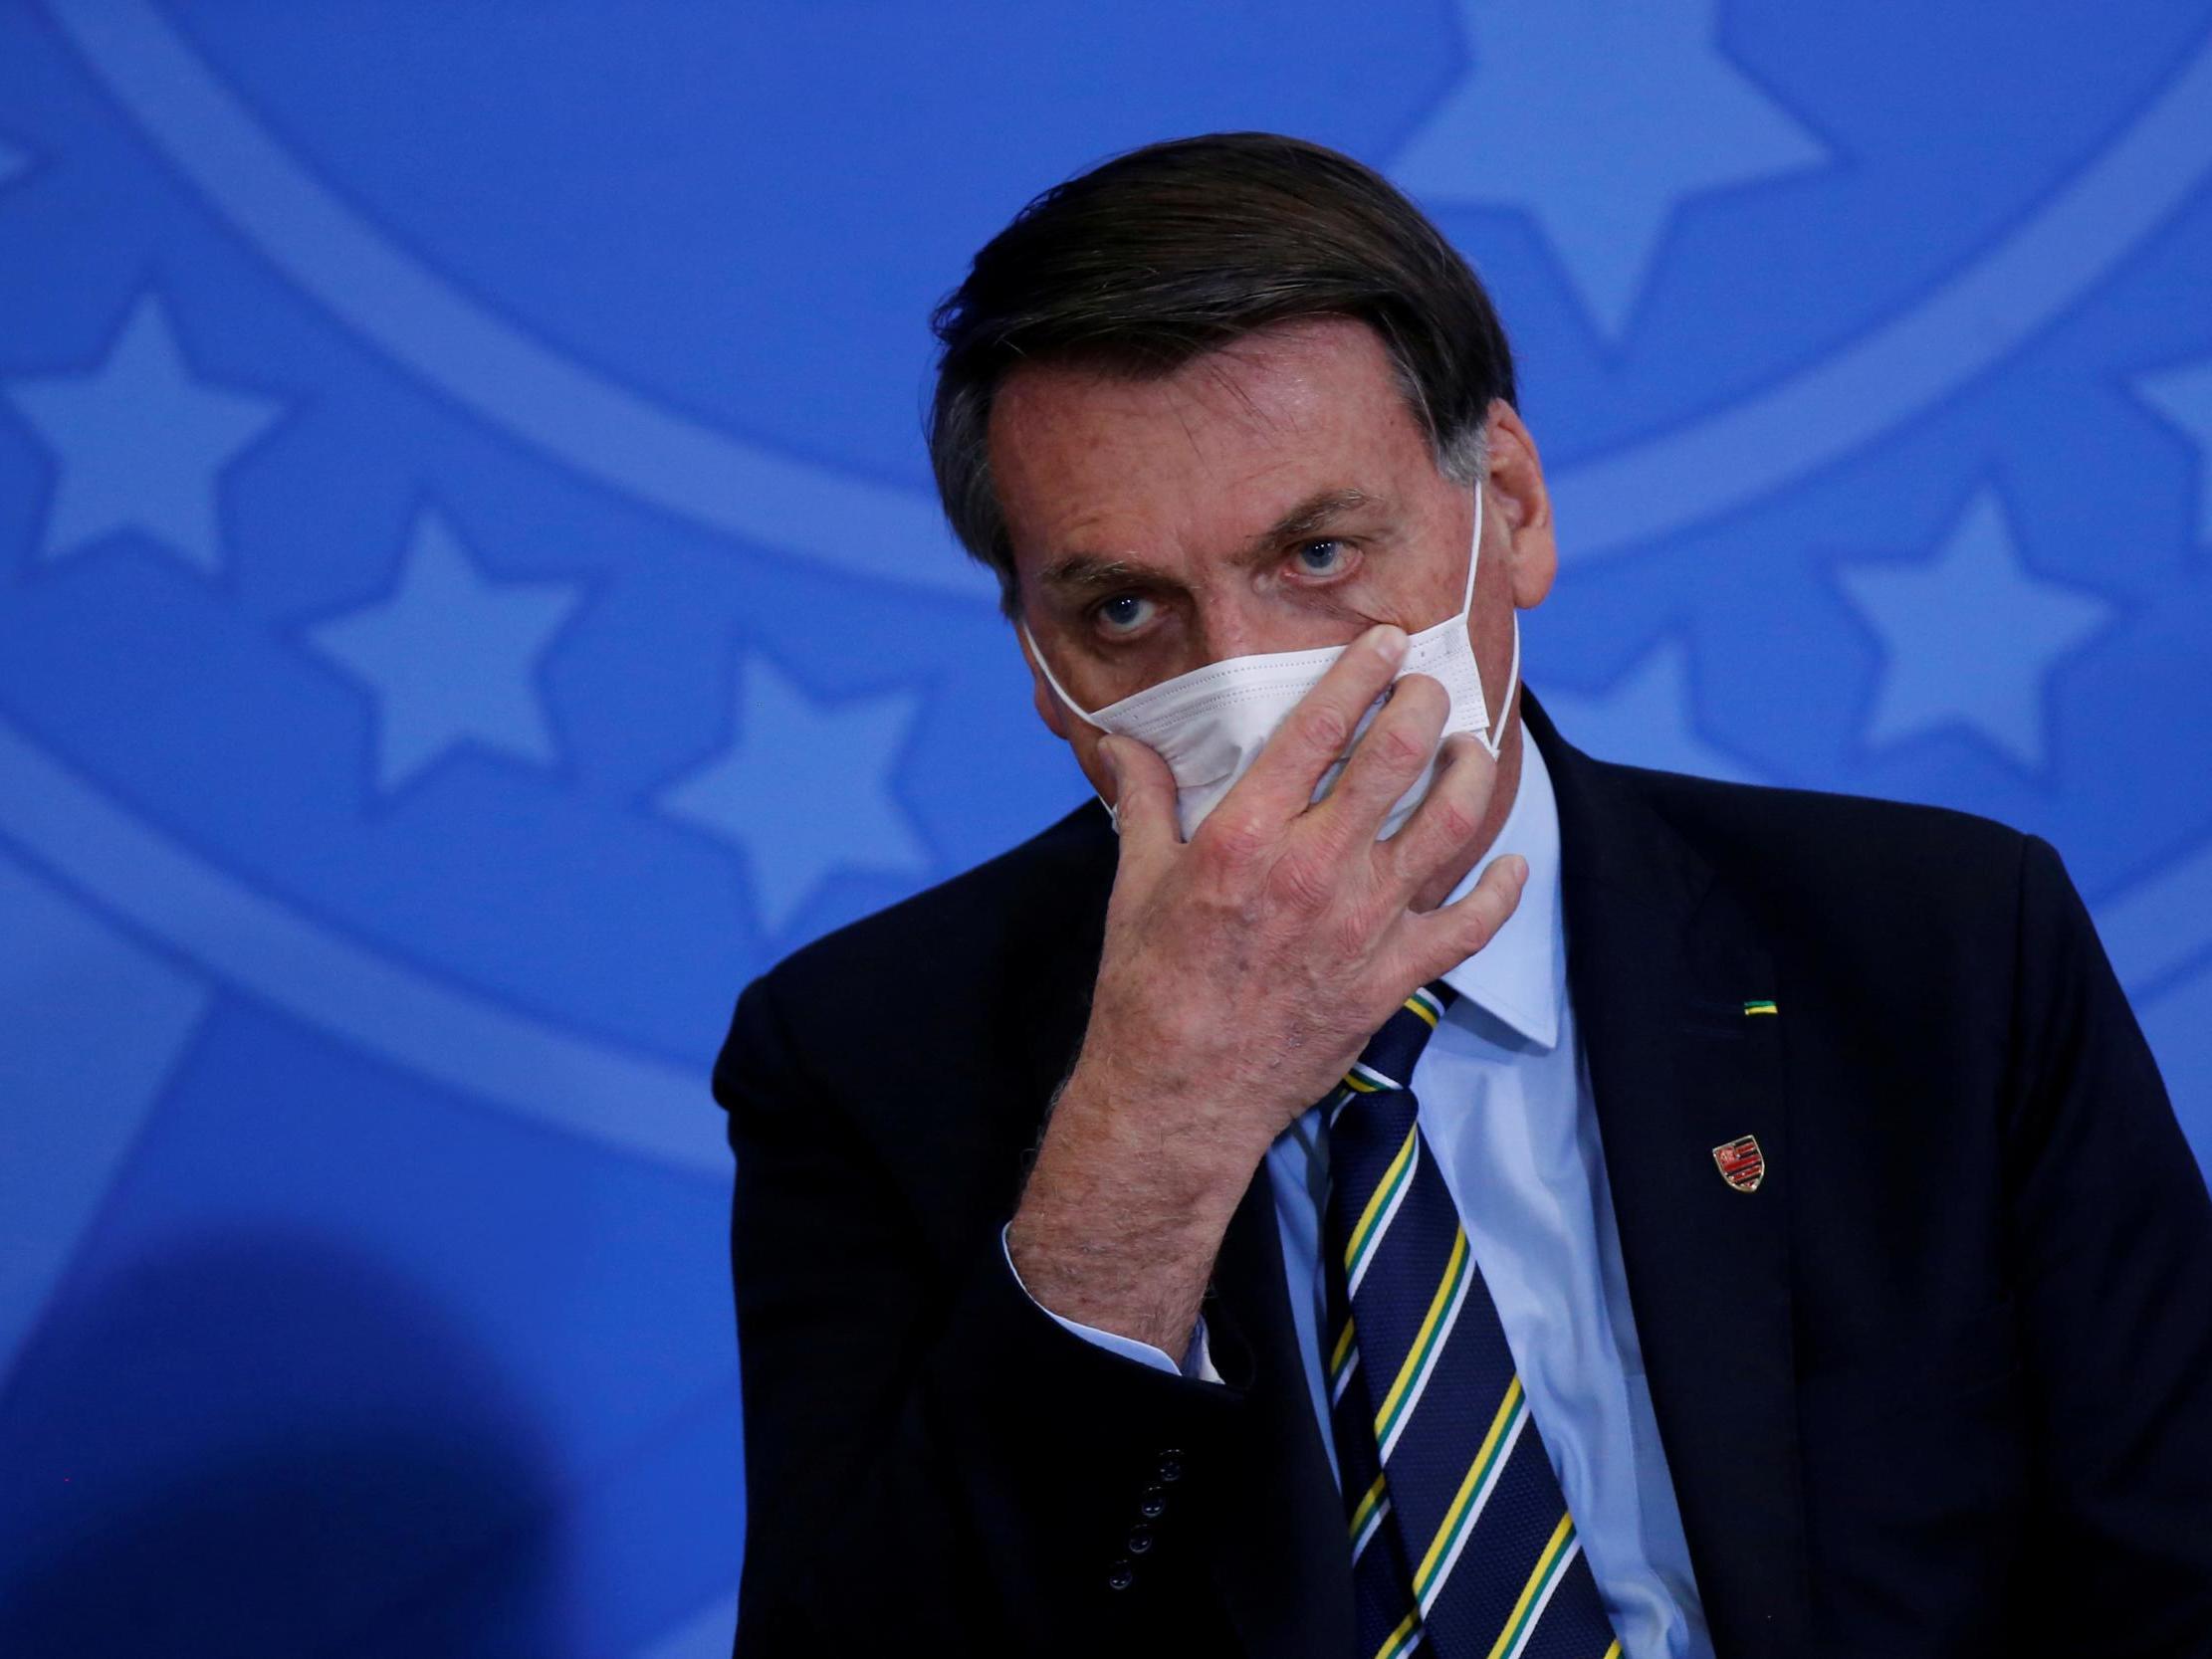 Brazil's populist president Jair Bolsonaro has frequently disregarded public health advice during the pandemic